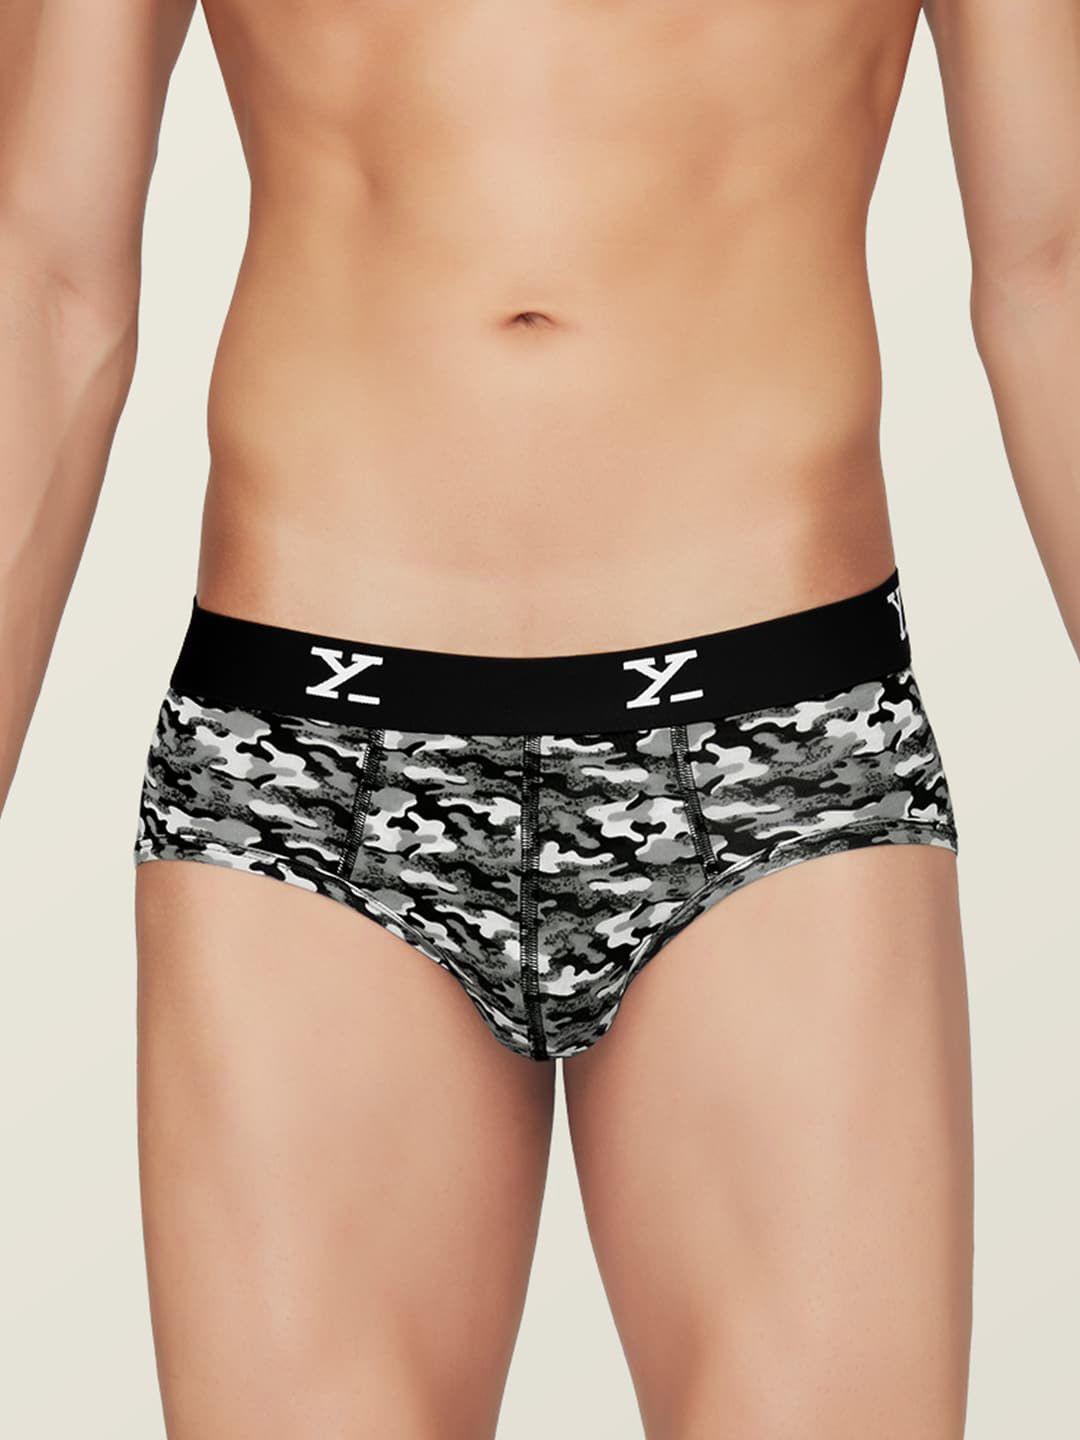 xyxx-men-pack-of-2-printed-antimicrobial-micro-modal-snug-fit-basic-briefs-xybrf43